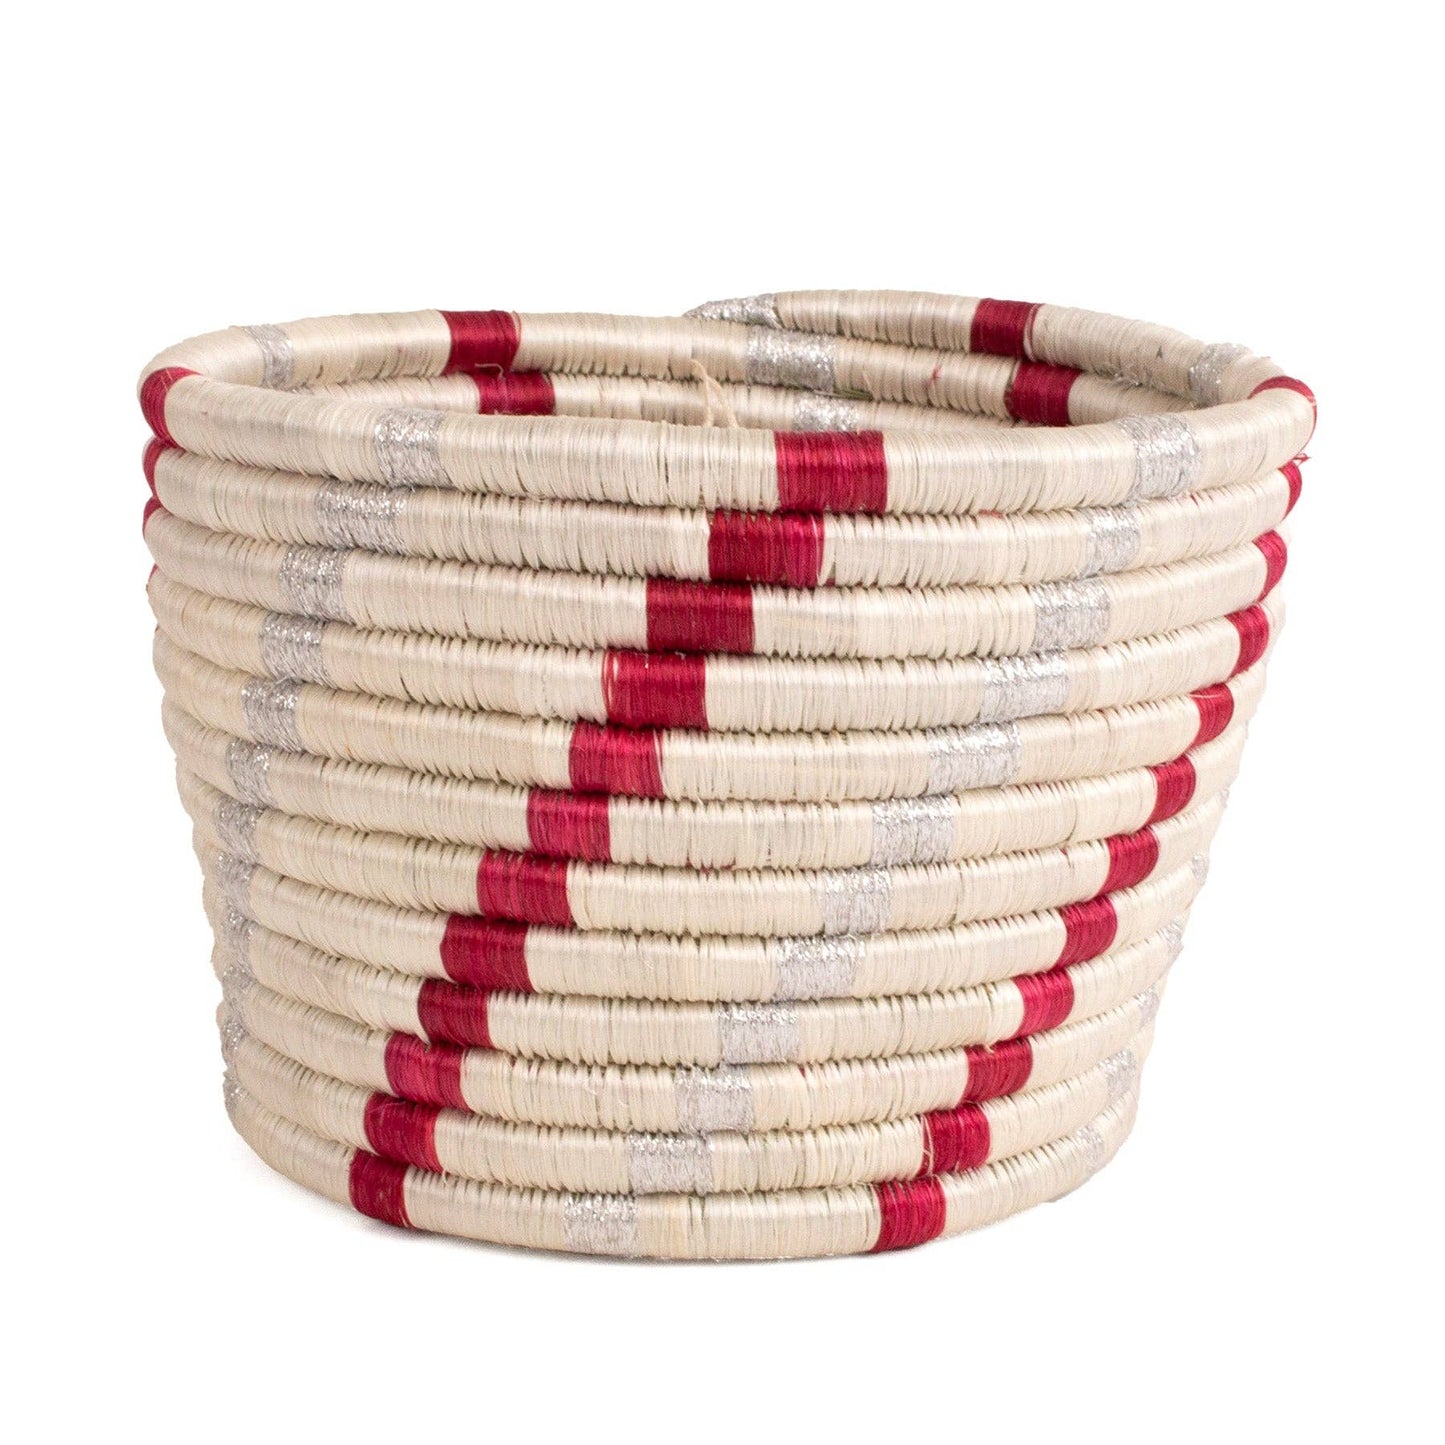 Woven Tapered Red Stripe Planter - 7"